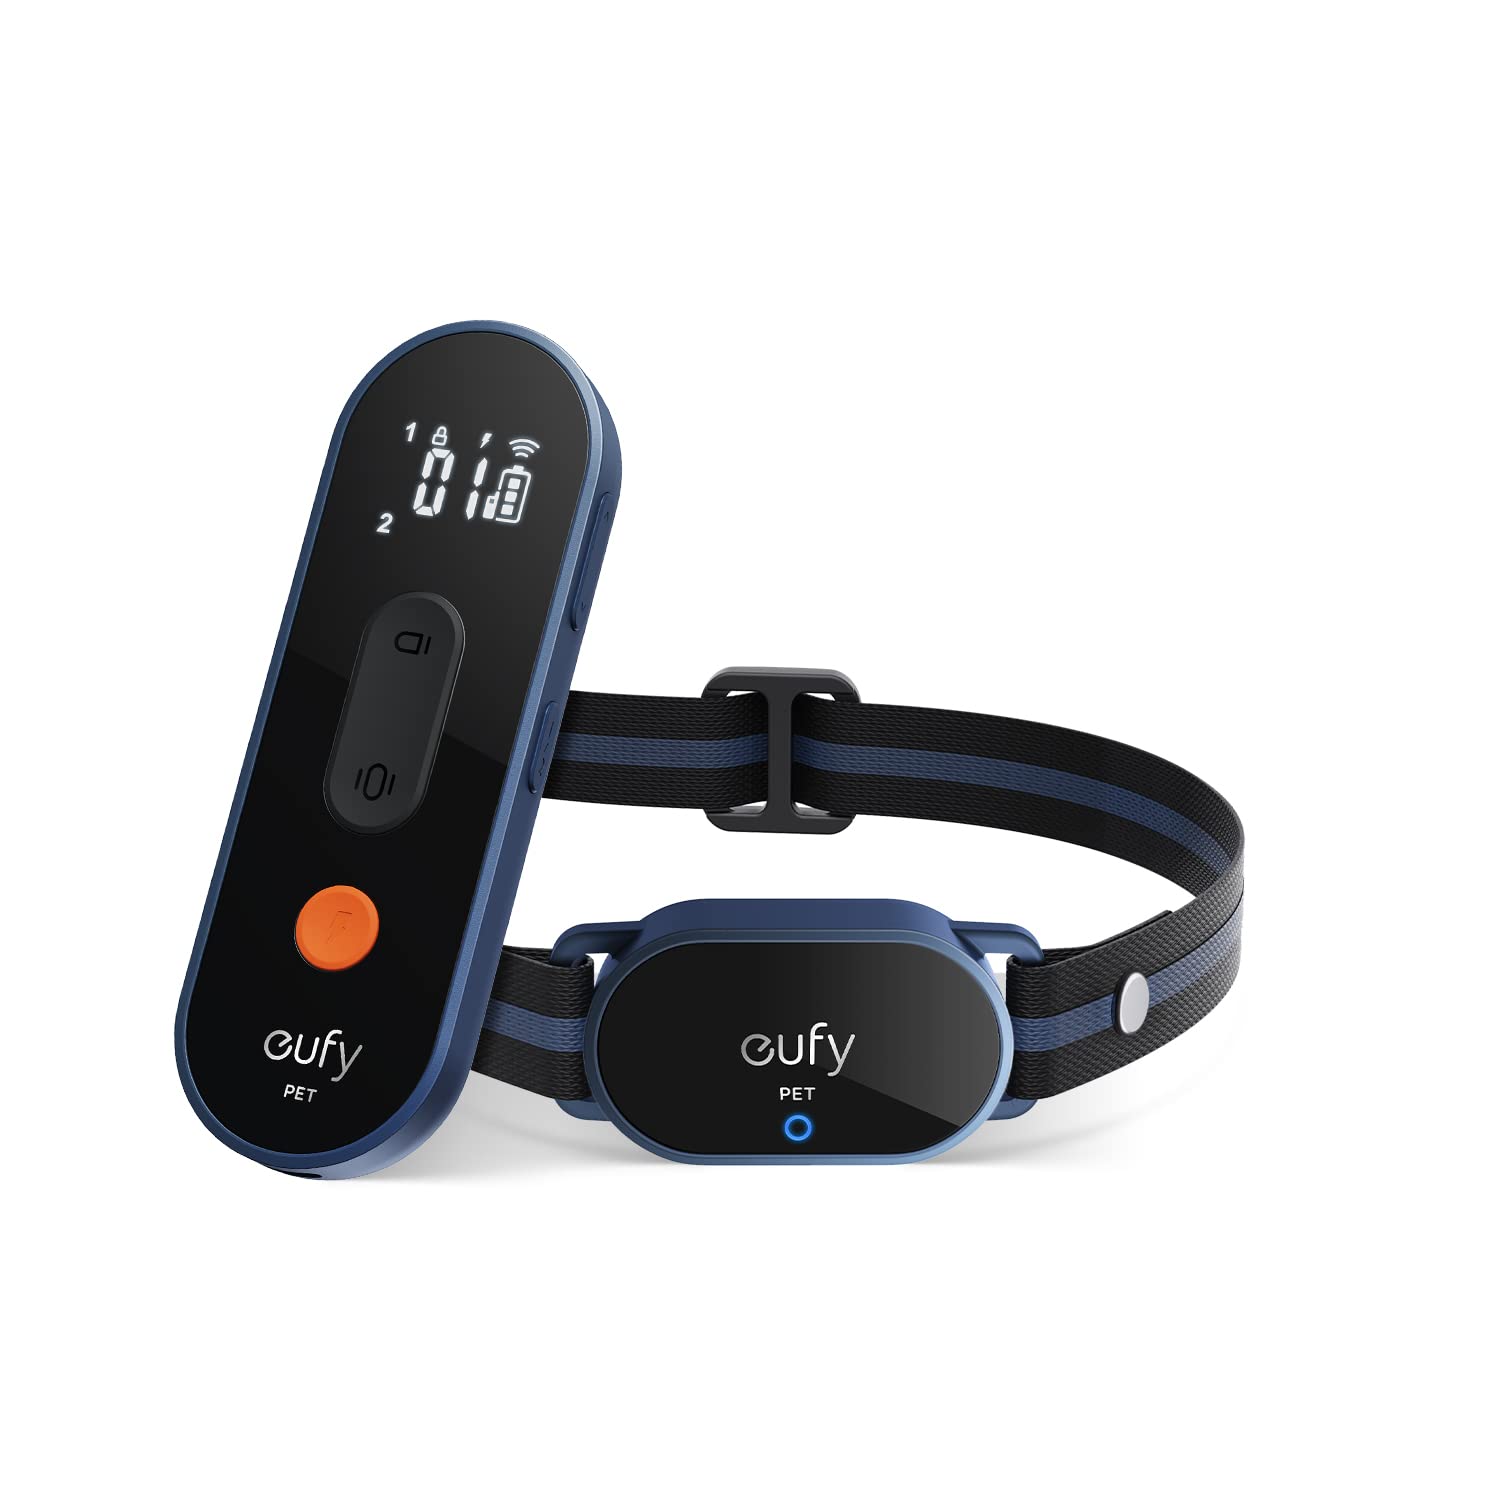 eufy Pet Training Collar for Large and Medium Dogs, Rechargeable and Adjustable Collar with Remote, 3 Safe Training Modes $24.99 or $29.99 for 2 at Amazon